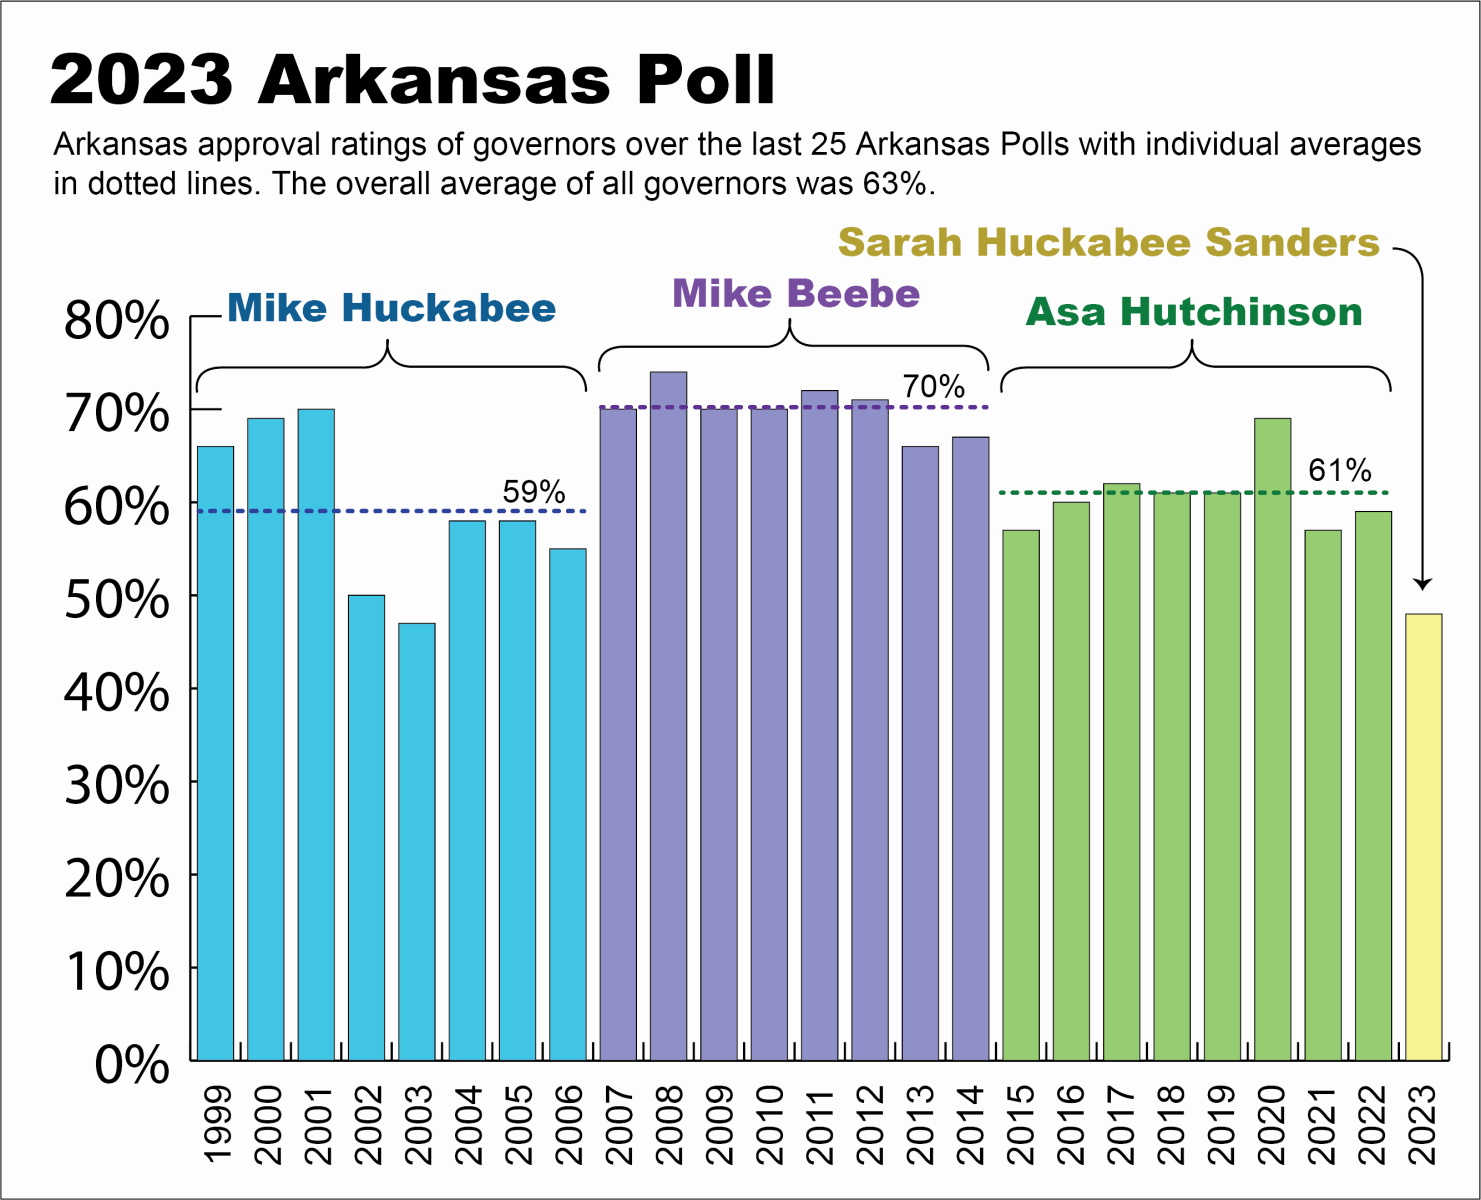 bar chart showing approvals of governors for the last 25 years with Mike Huckabee polling 59 percent on average Mike Beebe polling 70 percent, Asa Hutchinson polling 61 percent and Sarah Huckabee Sanders at 48 percent in her first year